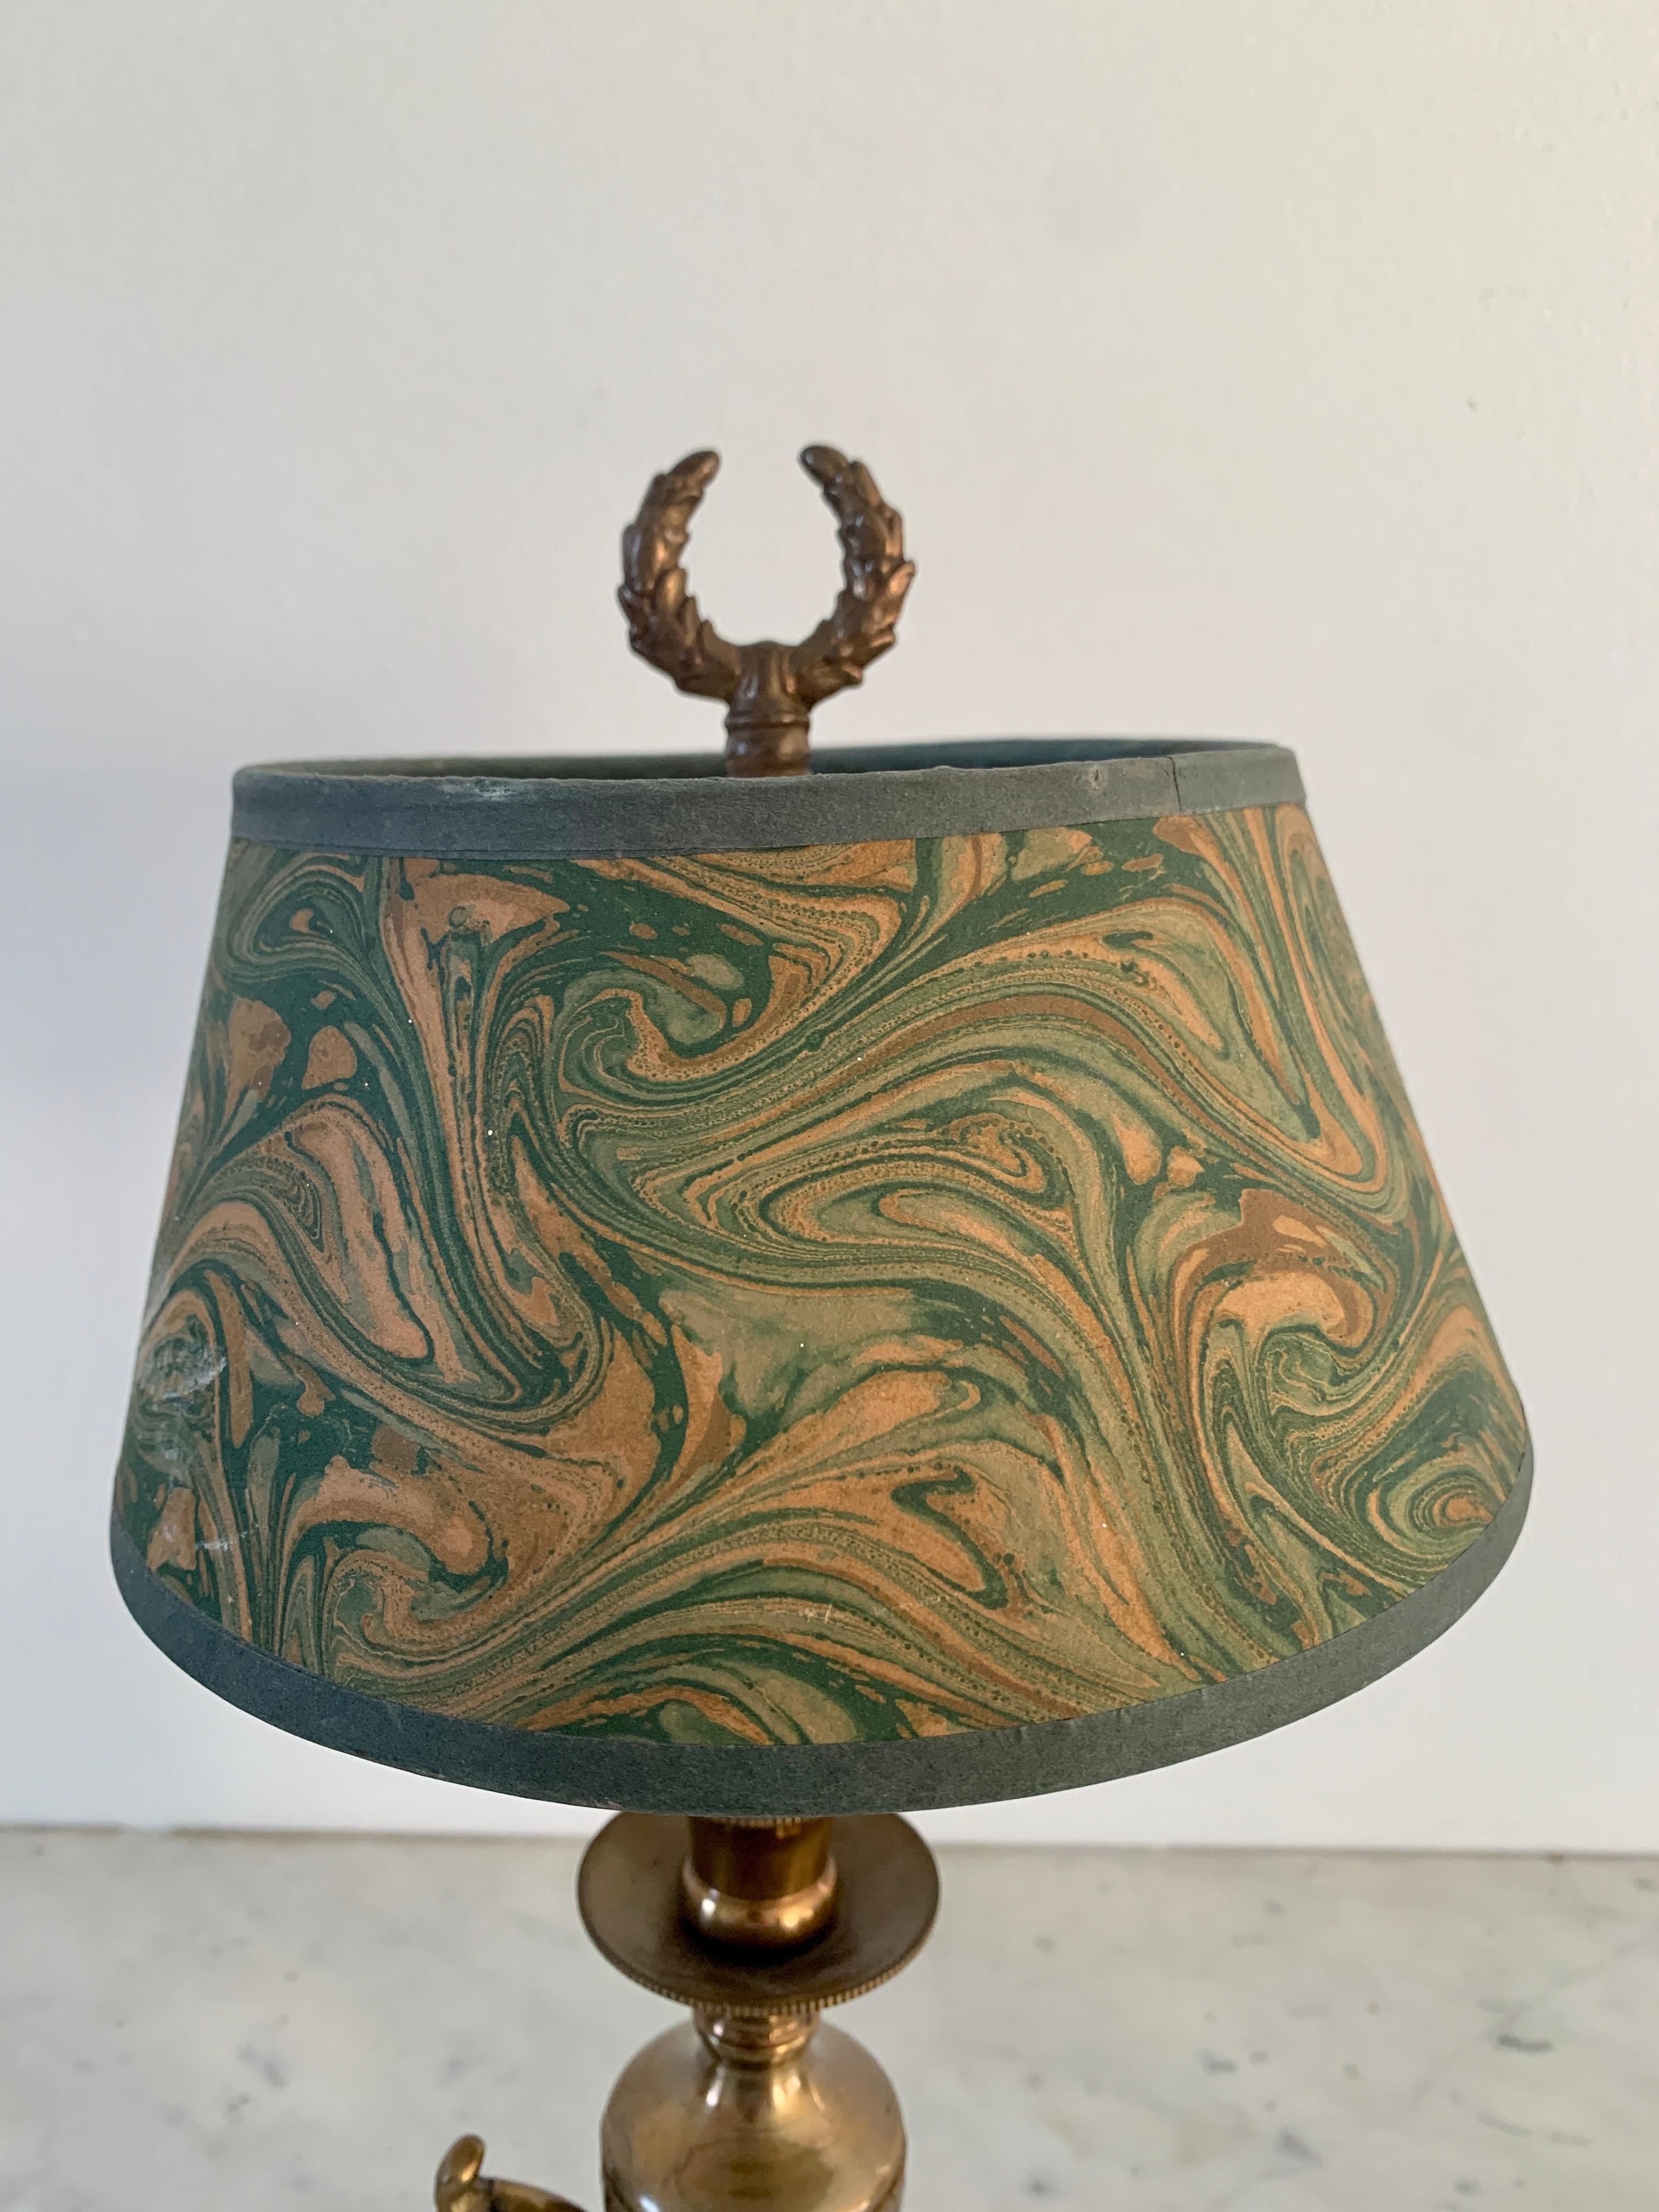 A gorgeous brass Neoclassical style table lamp.

USA, Late-20th century.

Measures: 6.25